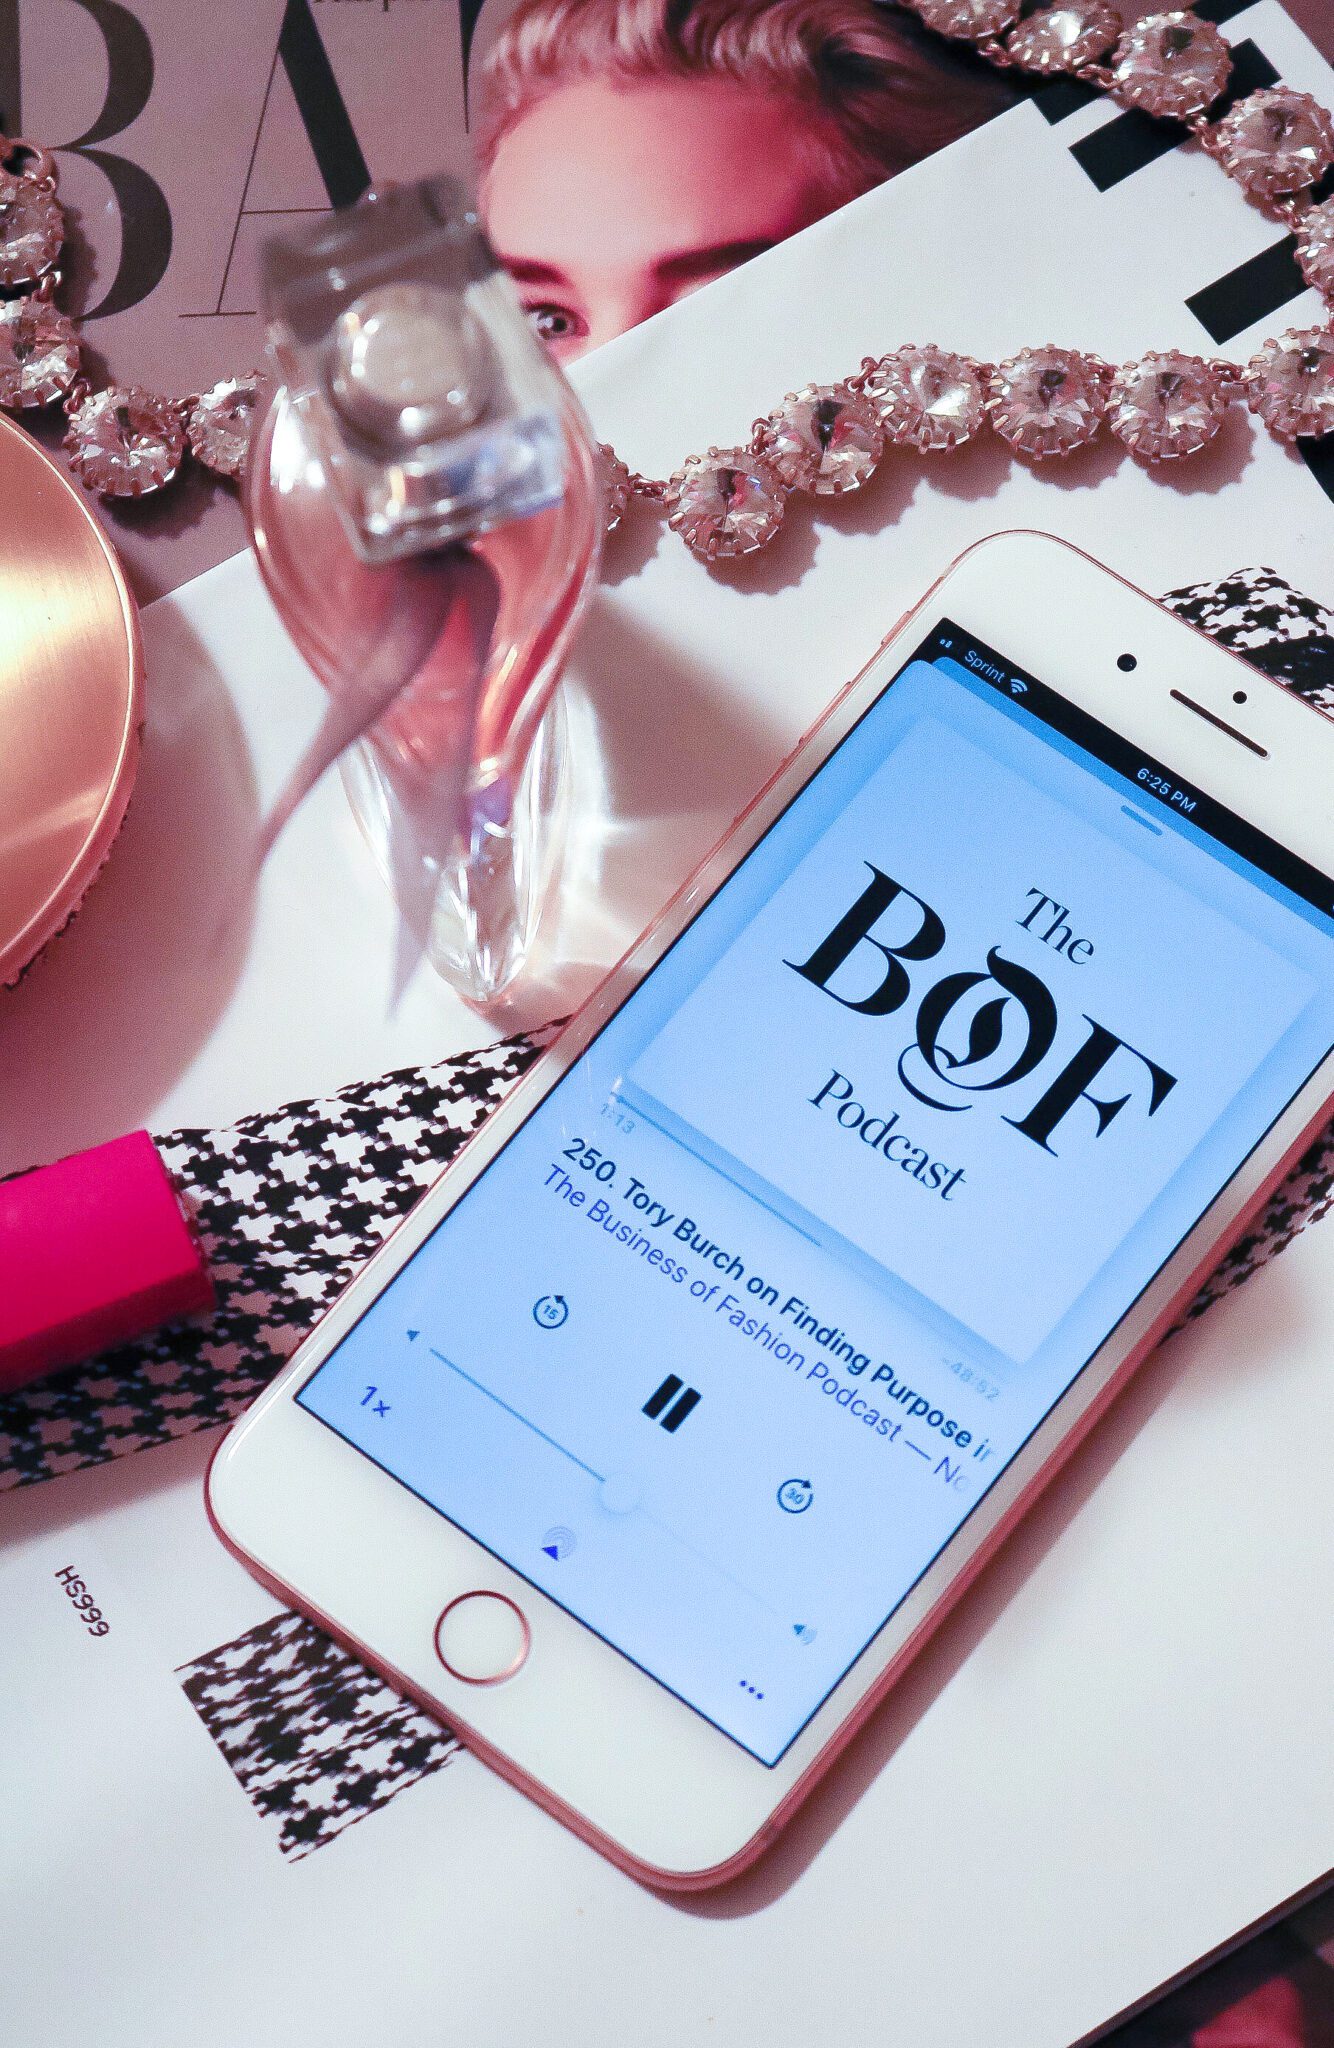 Best Fashion Podcasts 2020 Business Of Fashion Blog Dreaminlace 1334x2048 